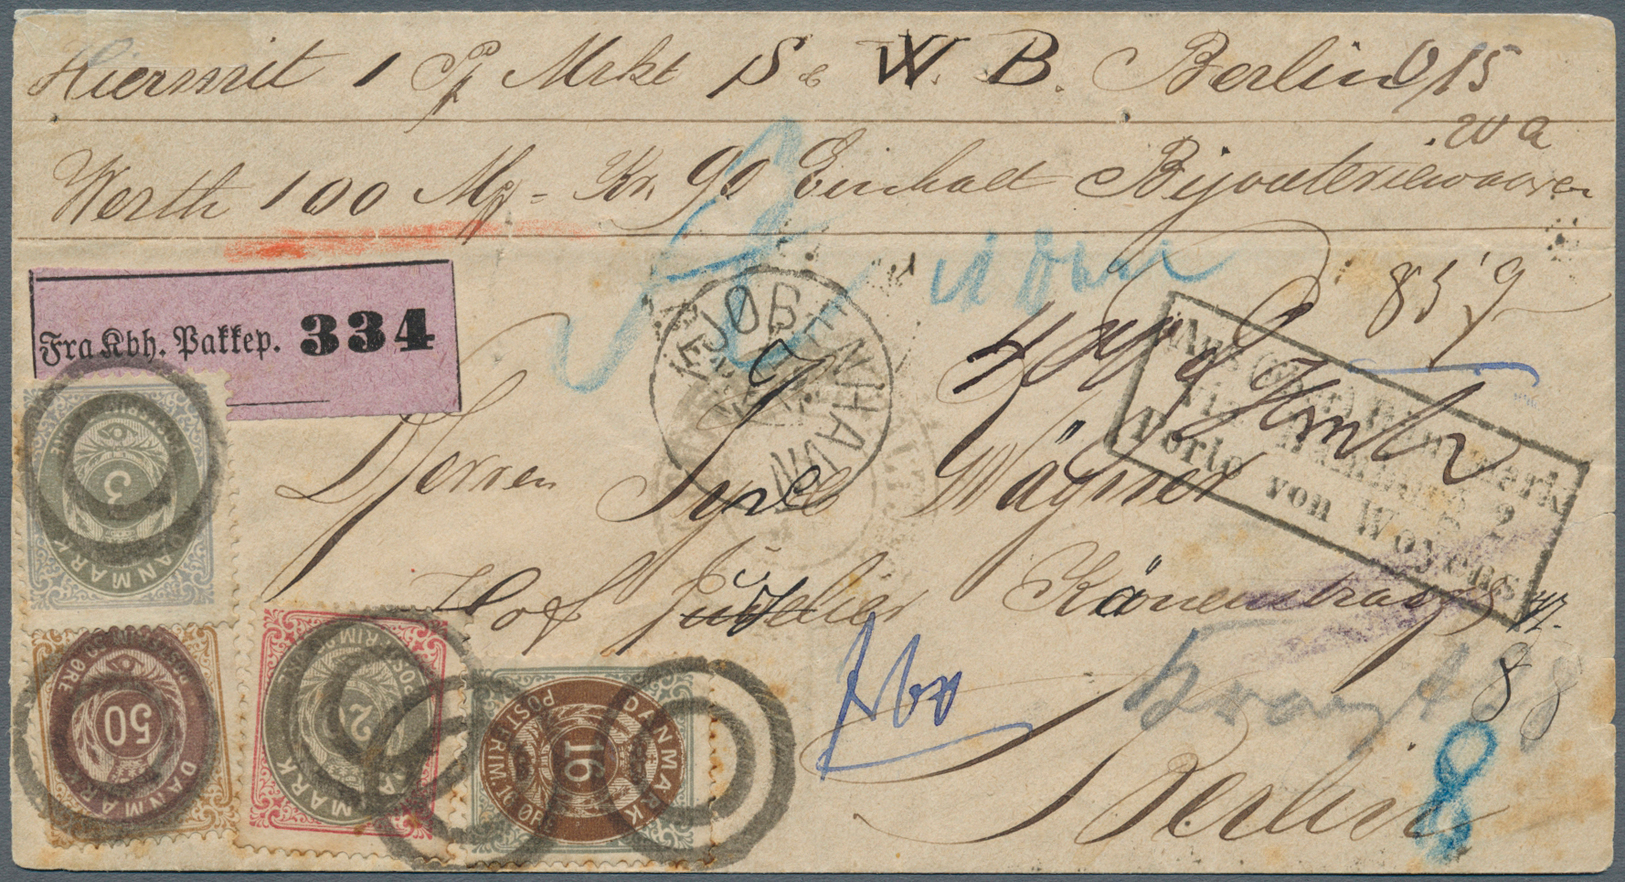 Br Dänemark: 1875, 50 Ö Brown/red Lilac (inverted Frame), 3 Ö Dull Blue/gray, 16 Ö Grey/brown, And 20 Ö Grey/red, - Covers & Documents